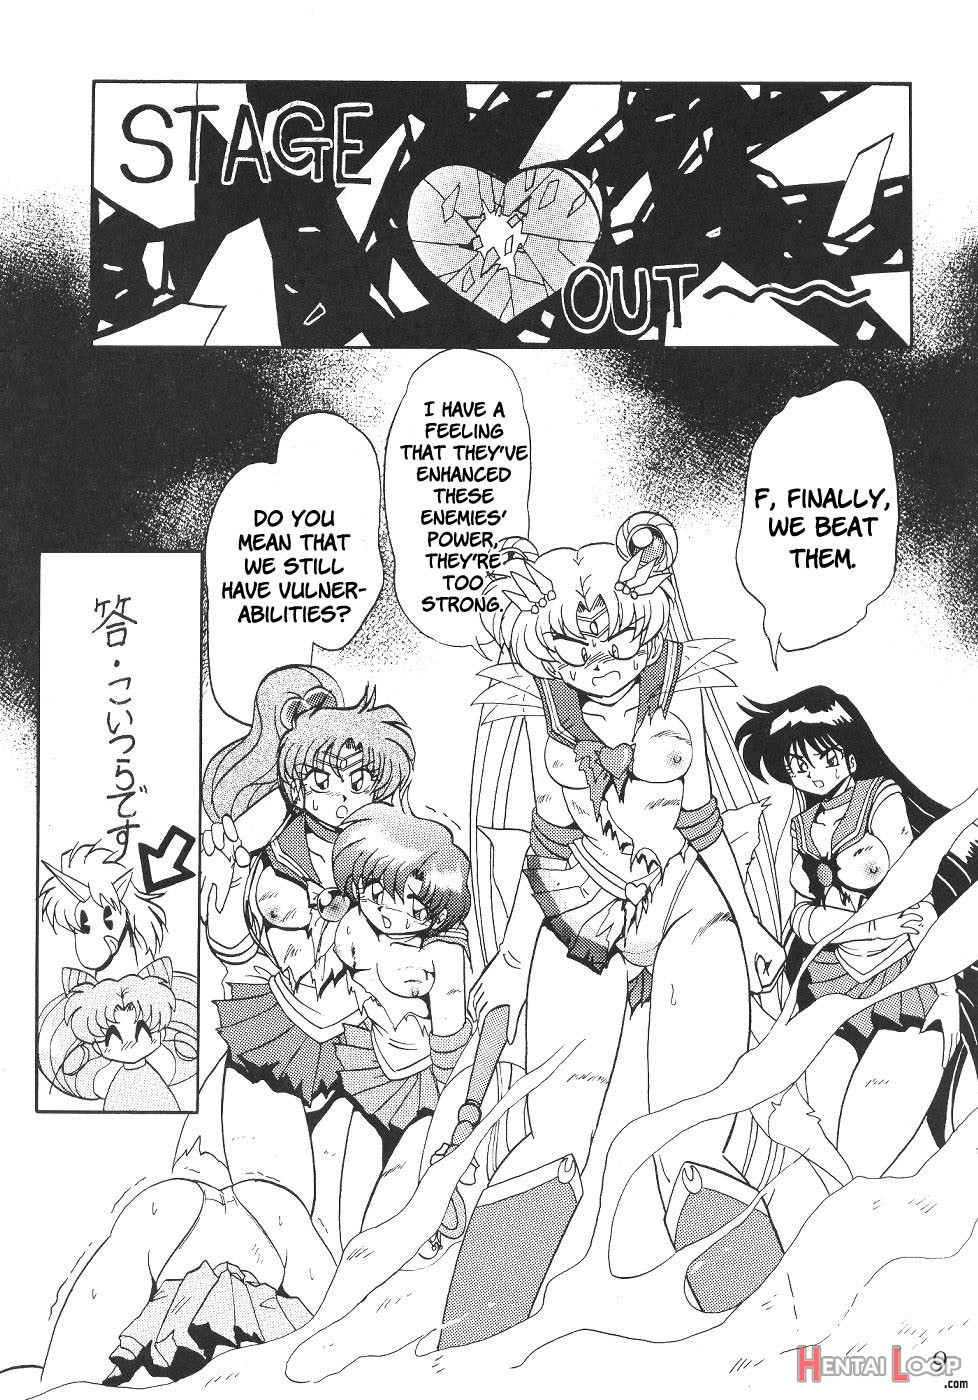 Silent Saturn Ss Vol. 2 page 9